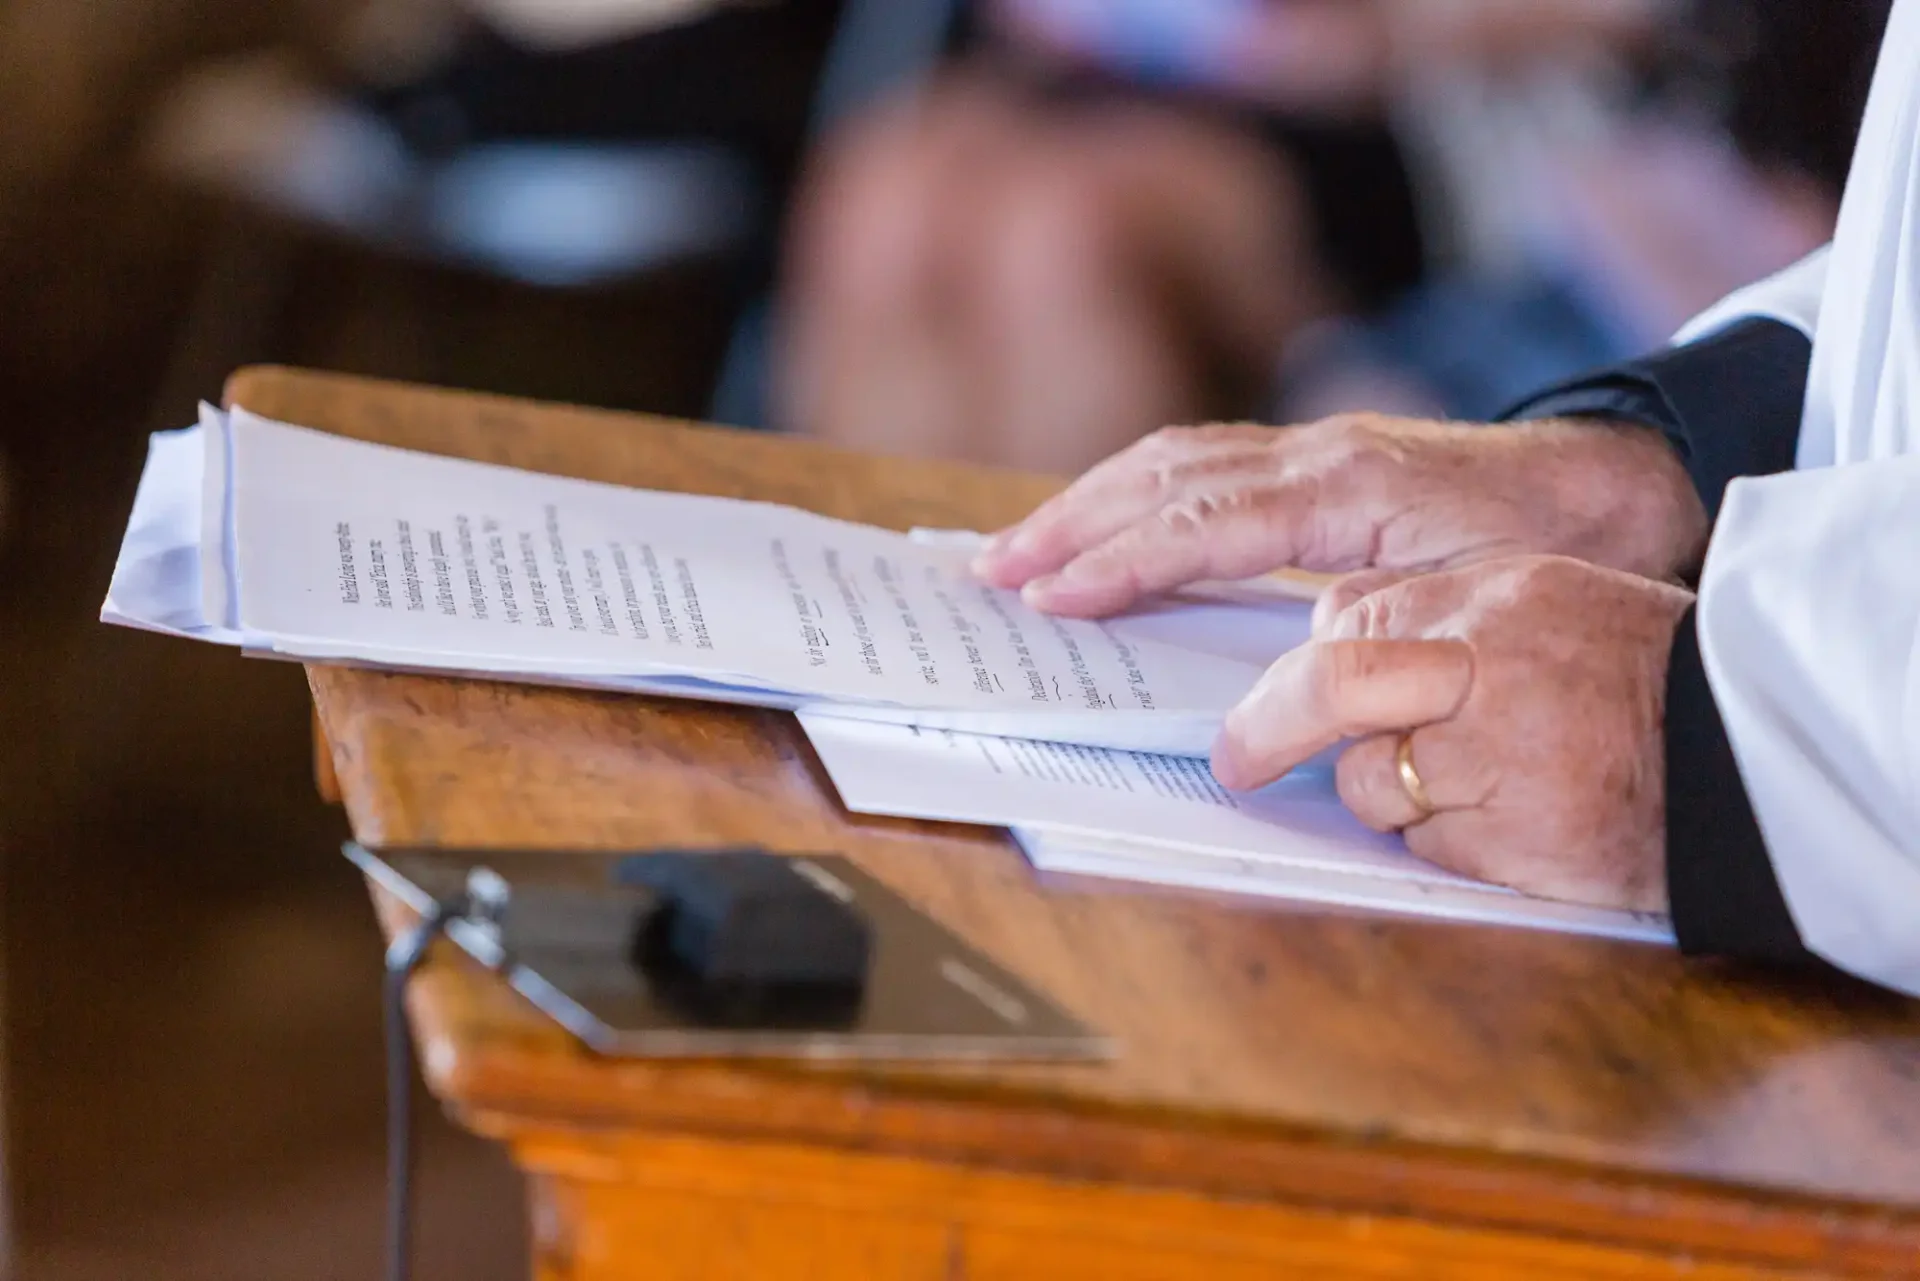 Close-up of a person's hands reading a document on a wooden lectern.